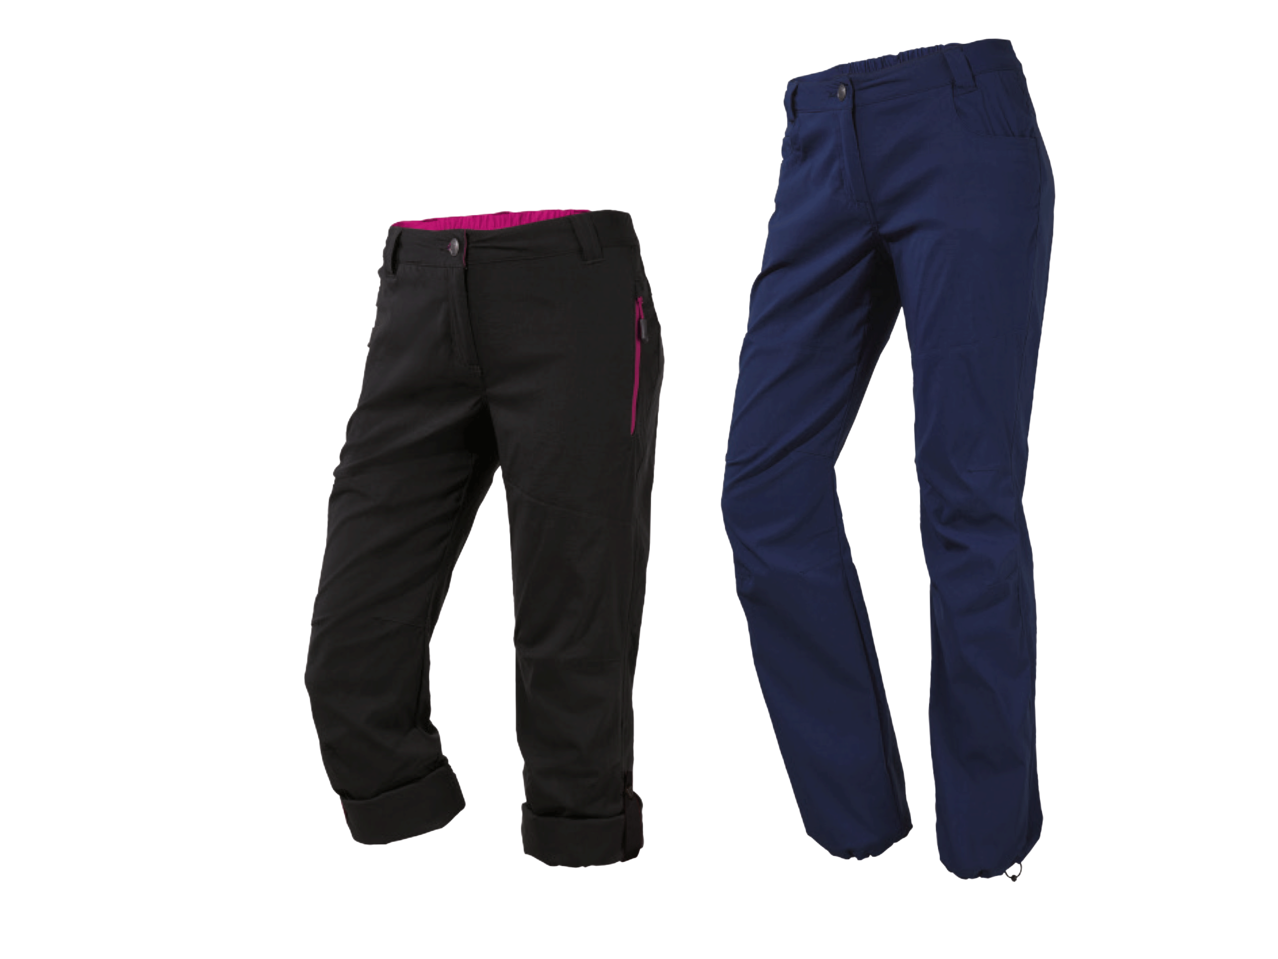 https://outsider.ie/wp-content/uploads/2018/02/Crevit-Hiking-Trousers.png